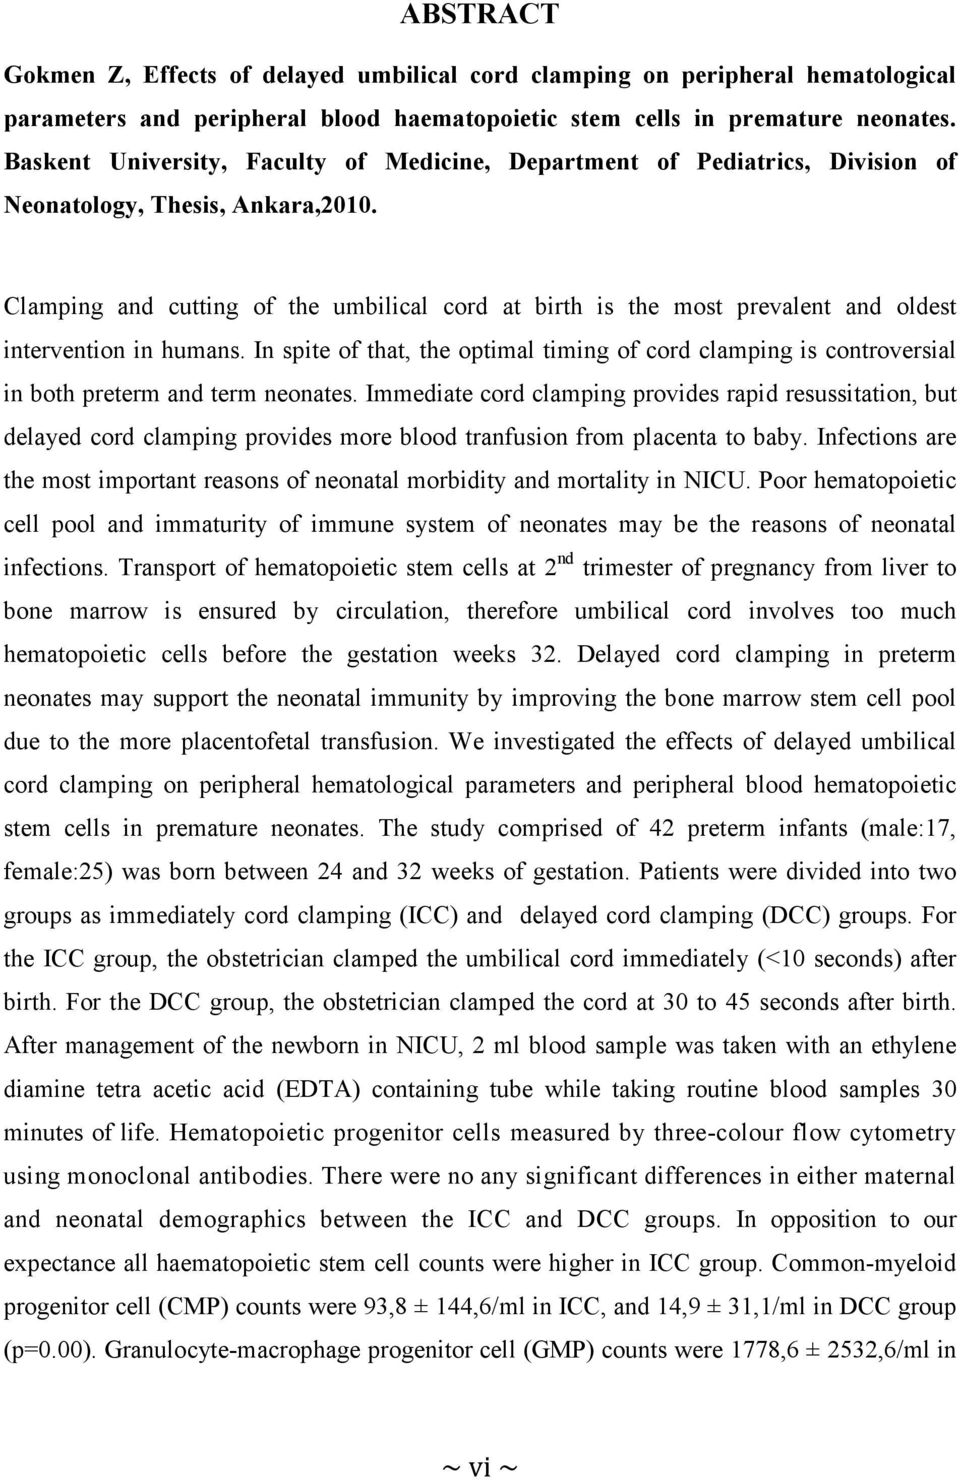 Clamping and cutting of the umbilical cord at birth is the most prevalent and oldest intervention in humans.